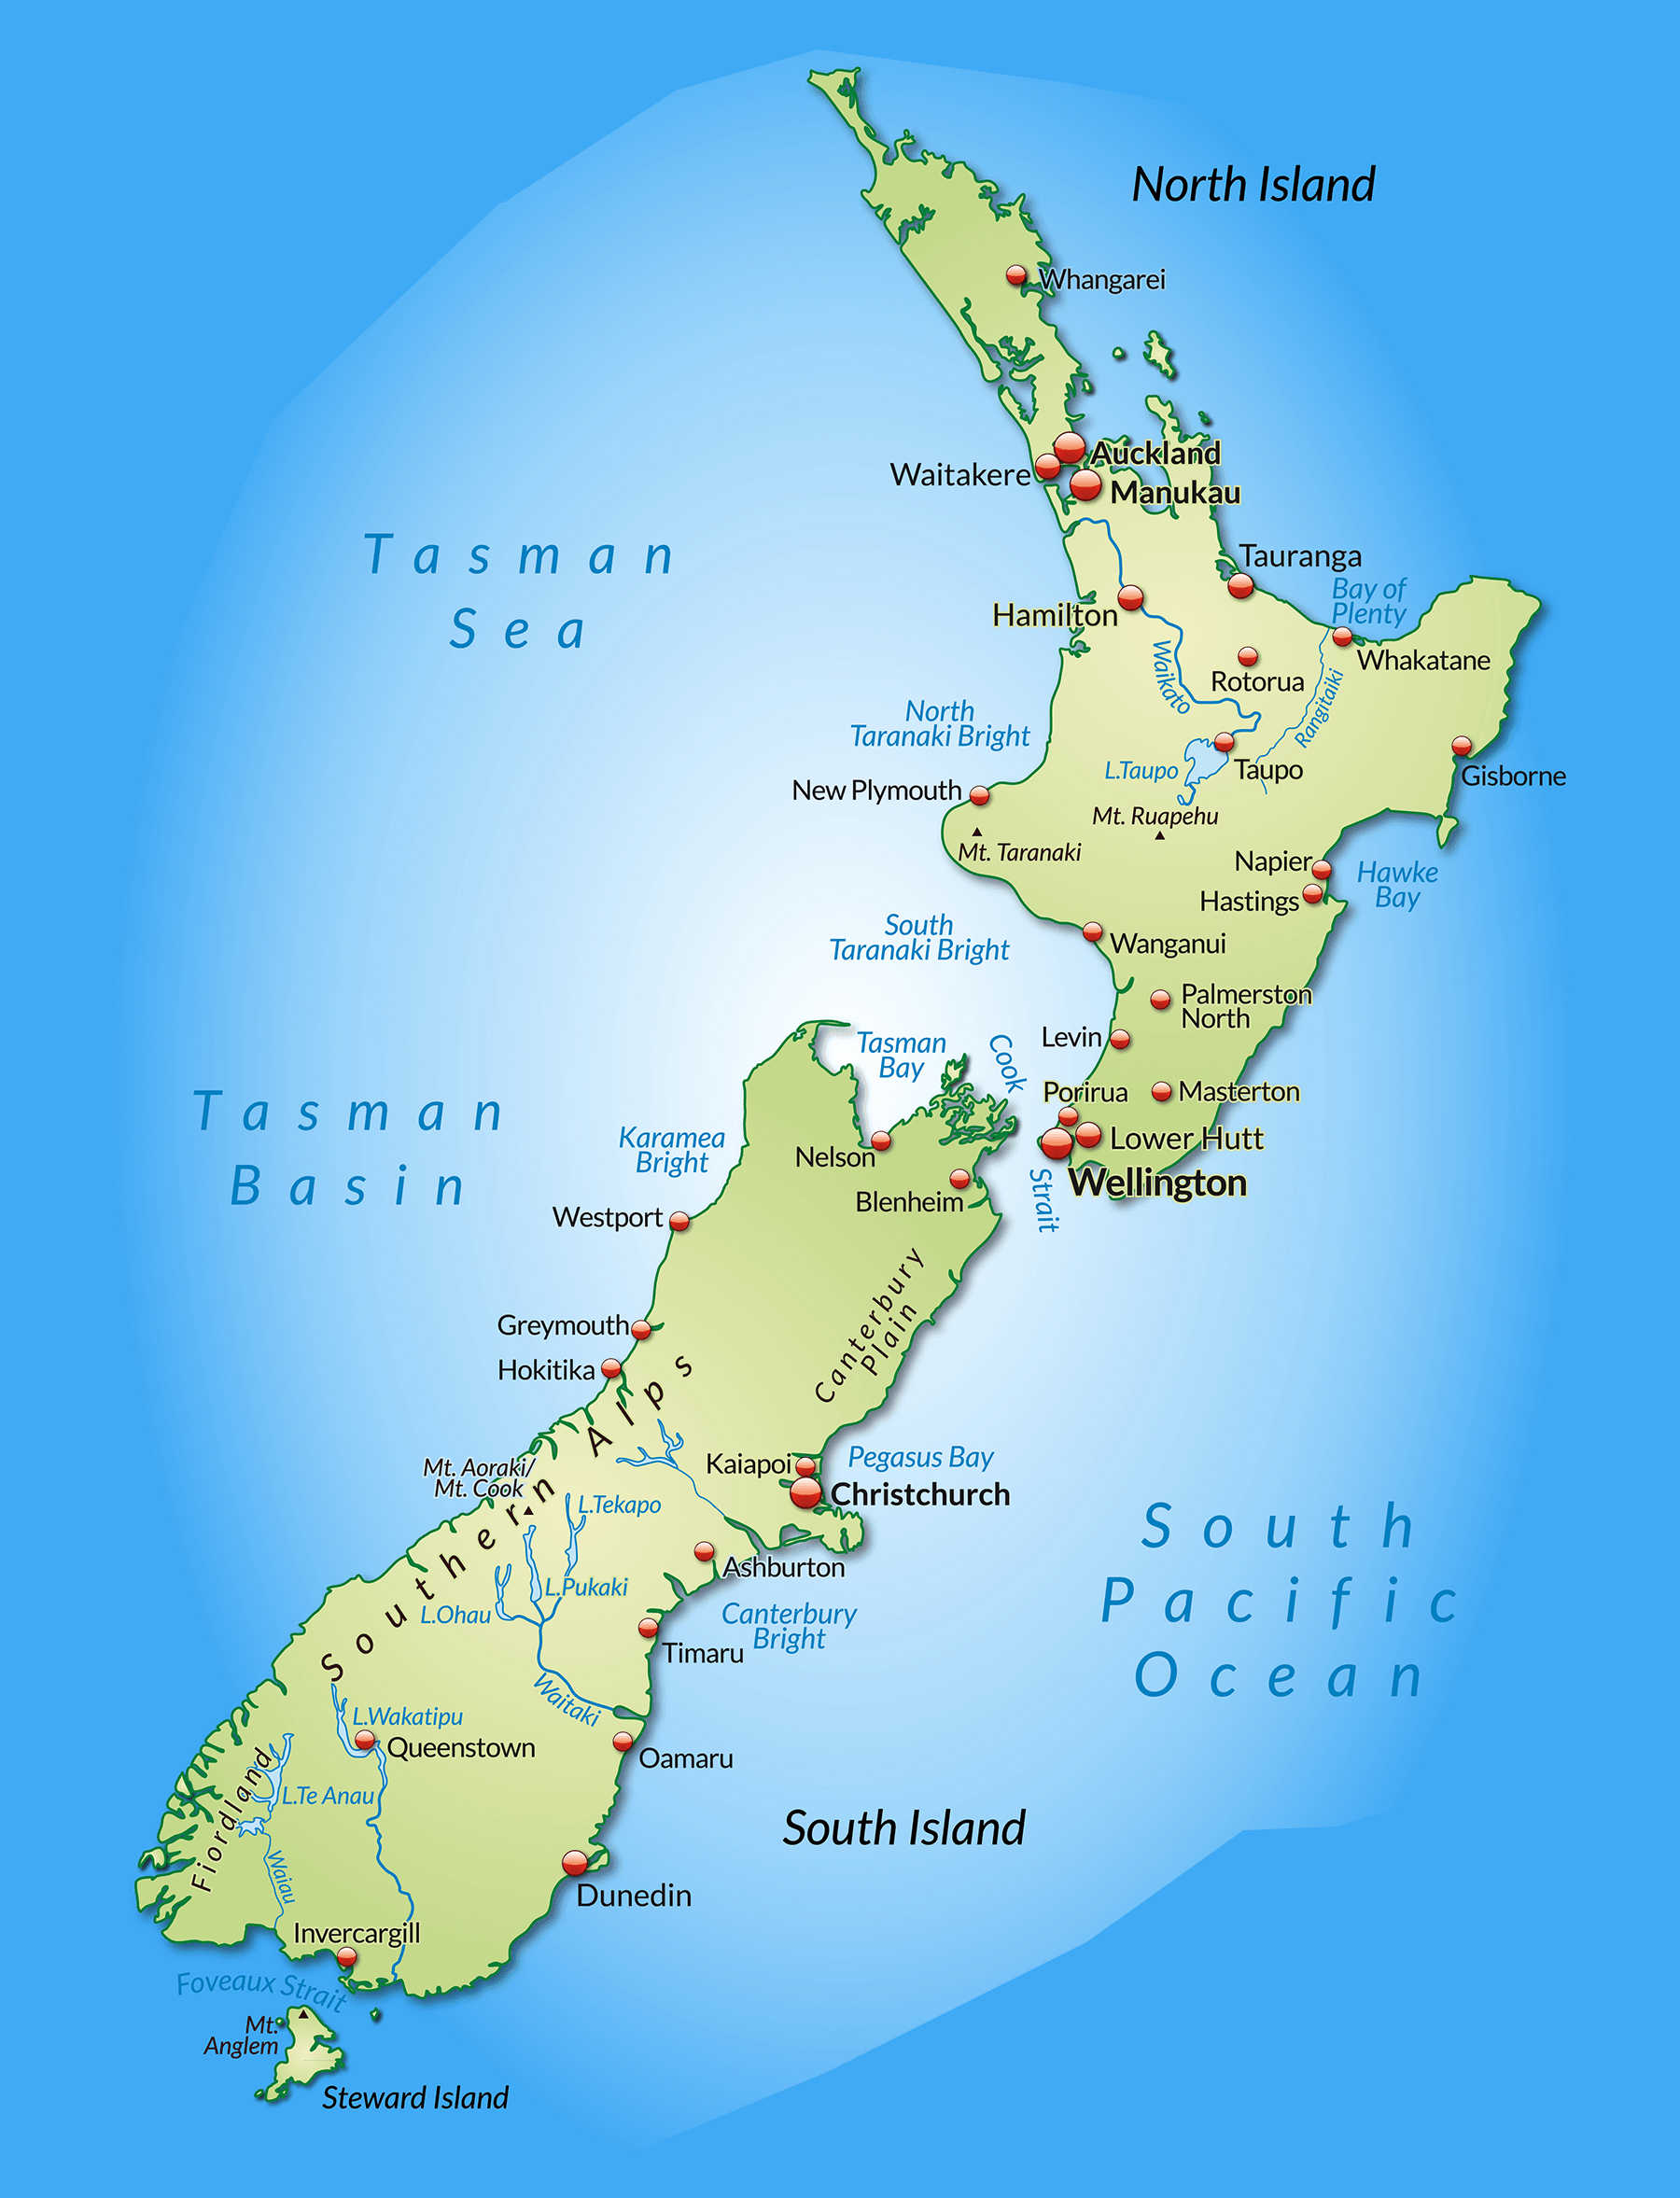 large-detailed-map-of-new-zealand-with-cities-new-zealand-oceania